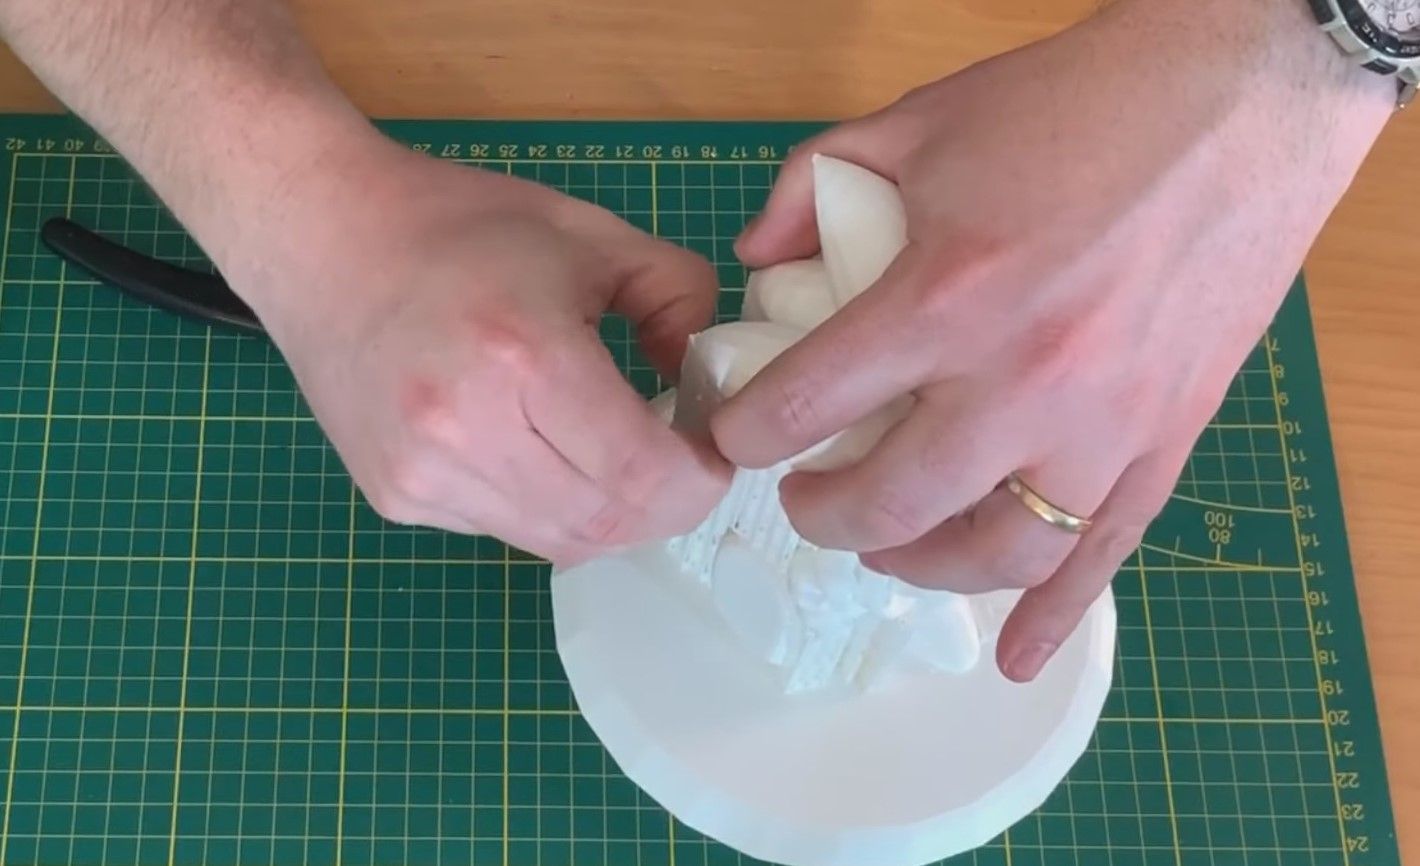 Hand of a white man removing supports from a model using his hands